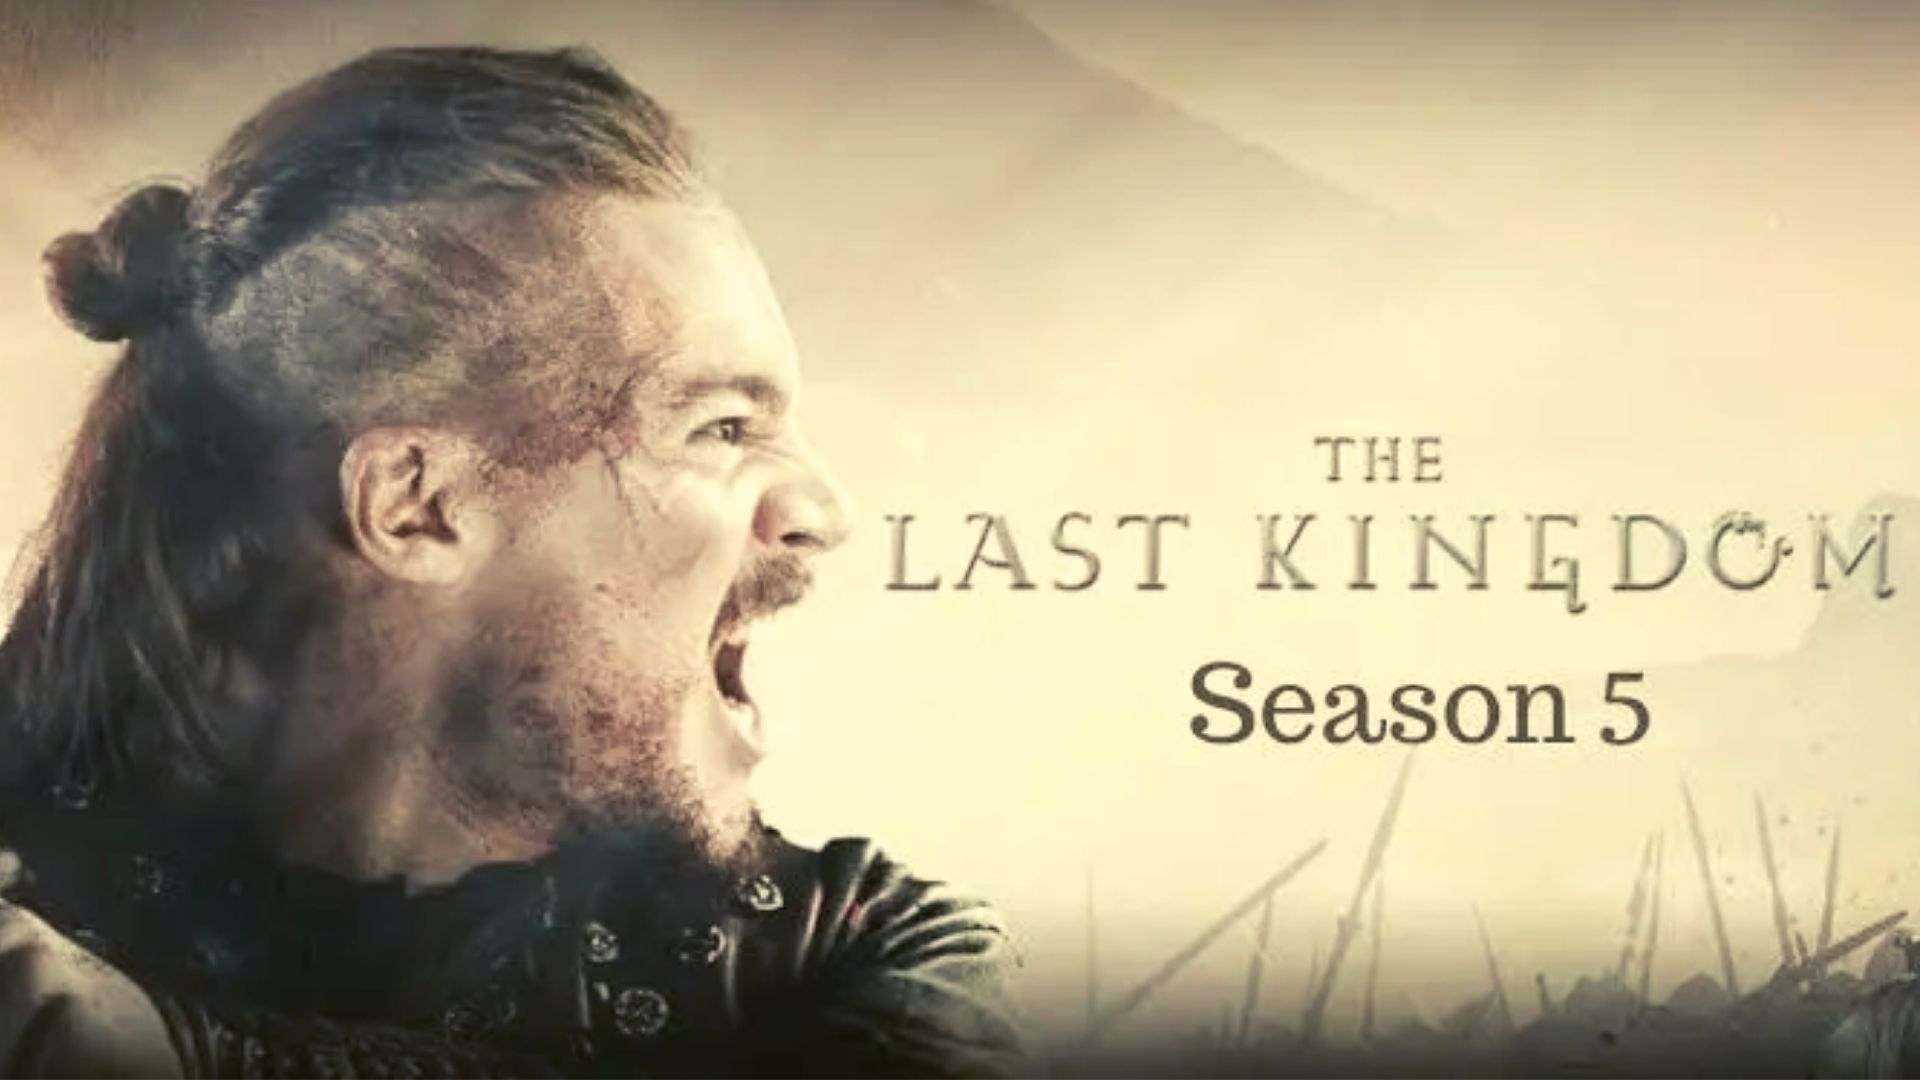 The Last Kingdom Season 5 Release Date, Star Cast, and Producer